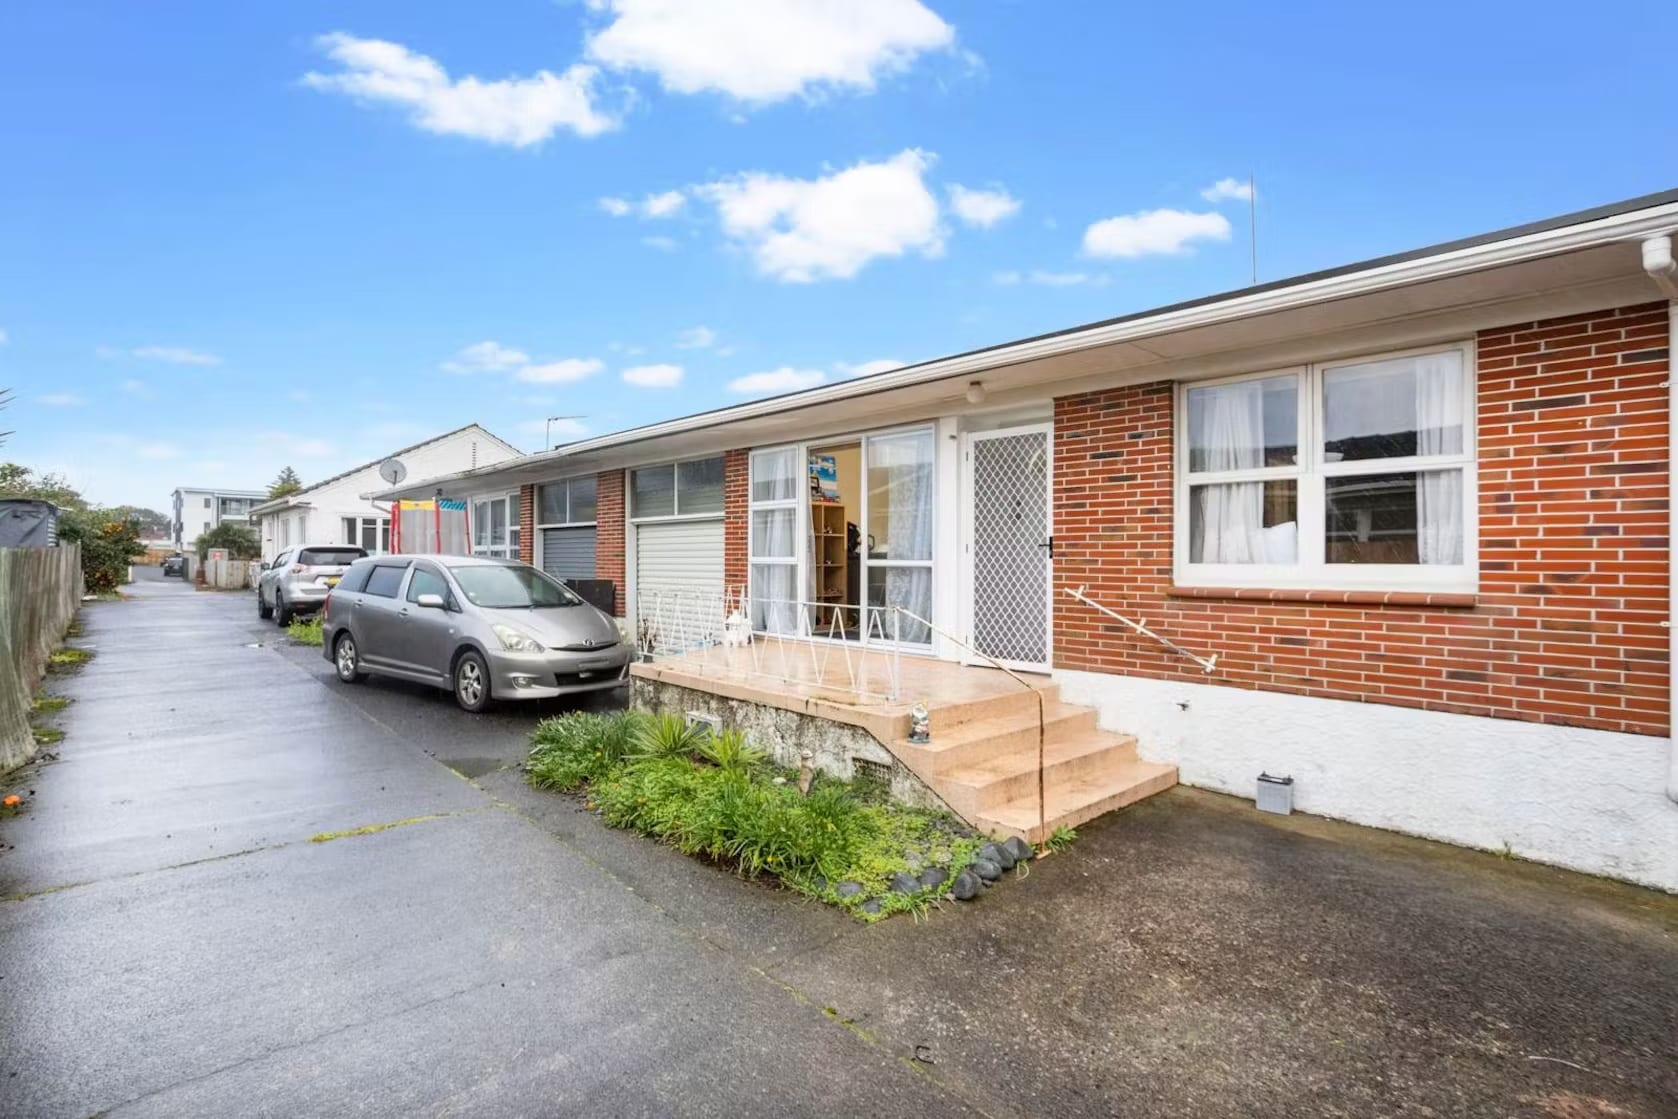 Mose-Real-Estate-Properties-for-sale-3-278-shirley-road-papatoetoe-4